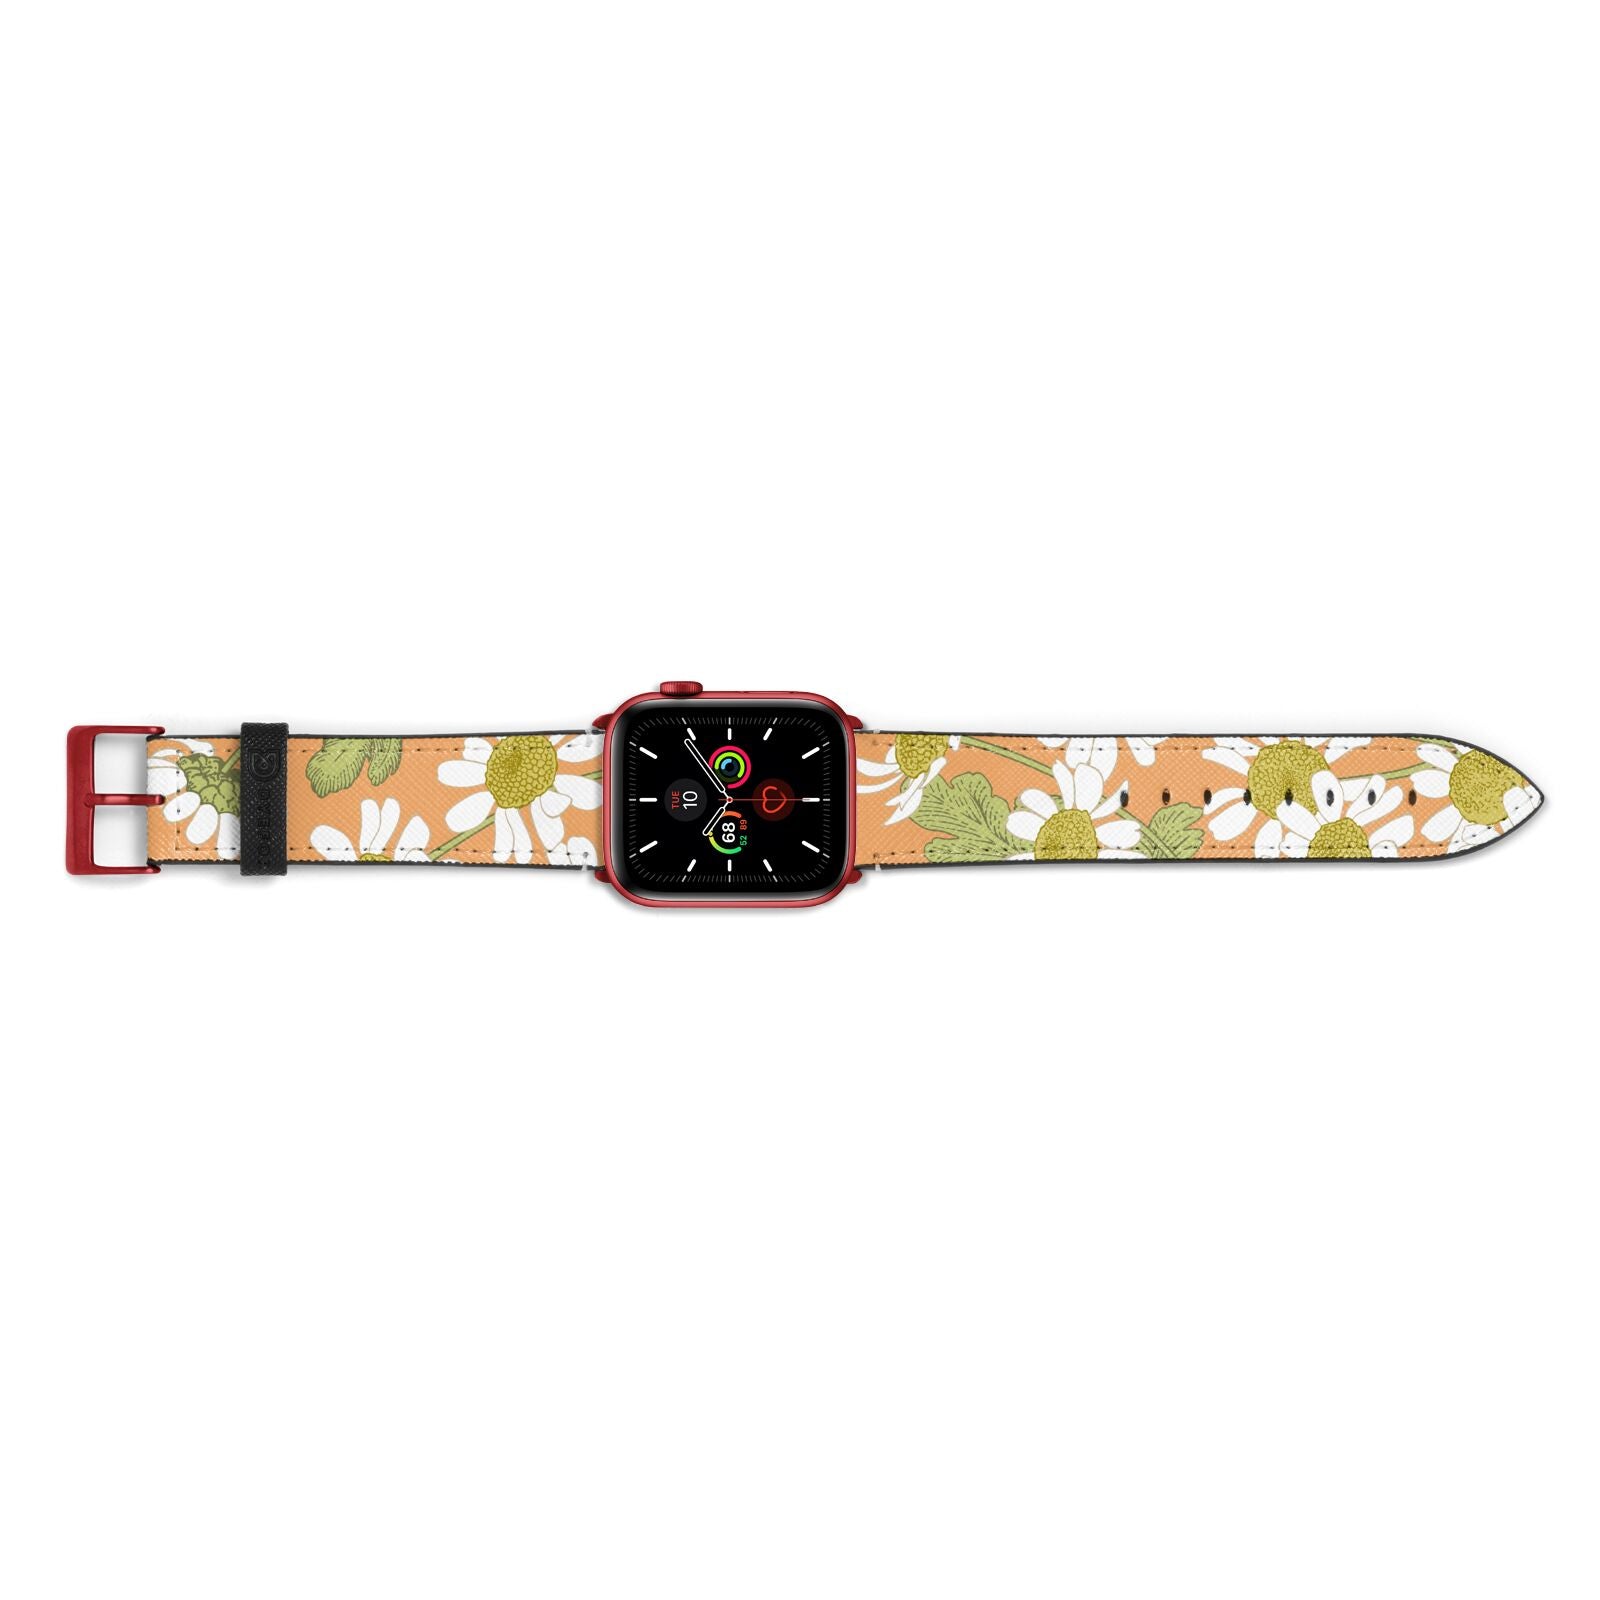 Daisies Apple Watch Strap Landscape Image Red Hardware